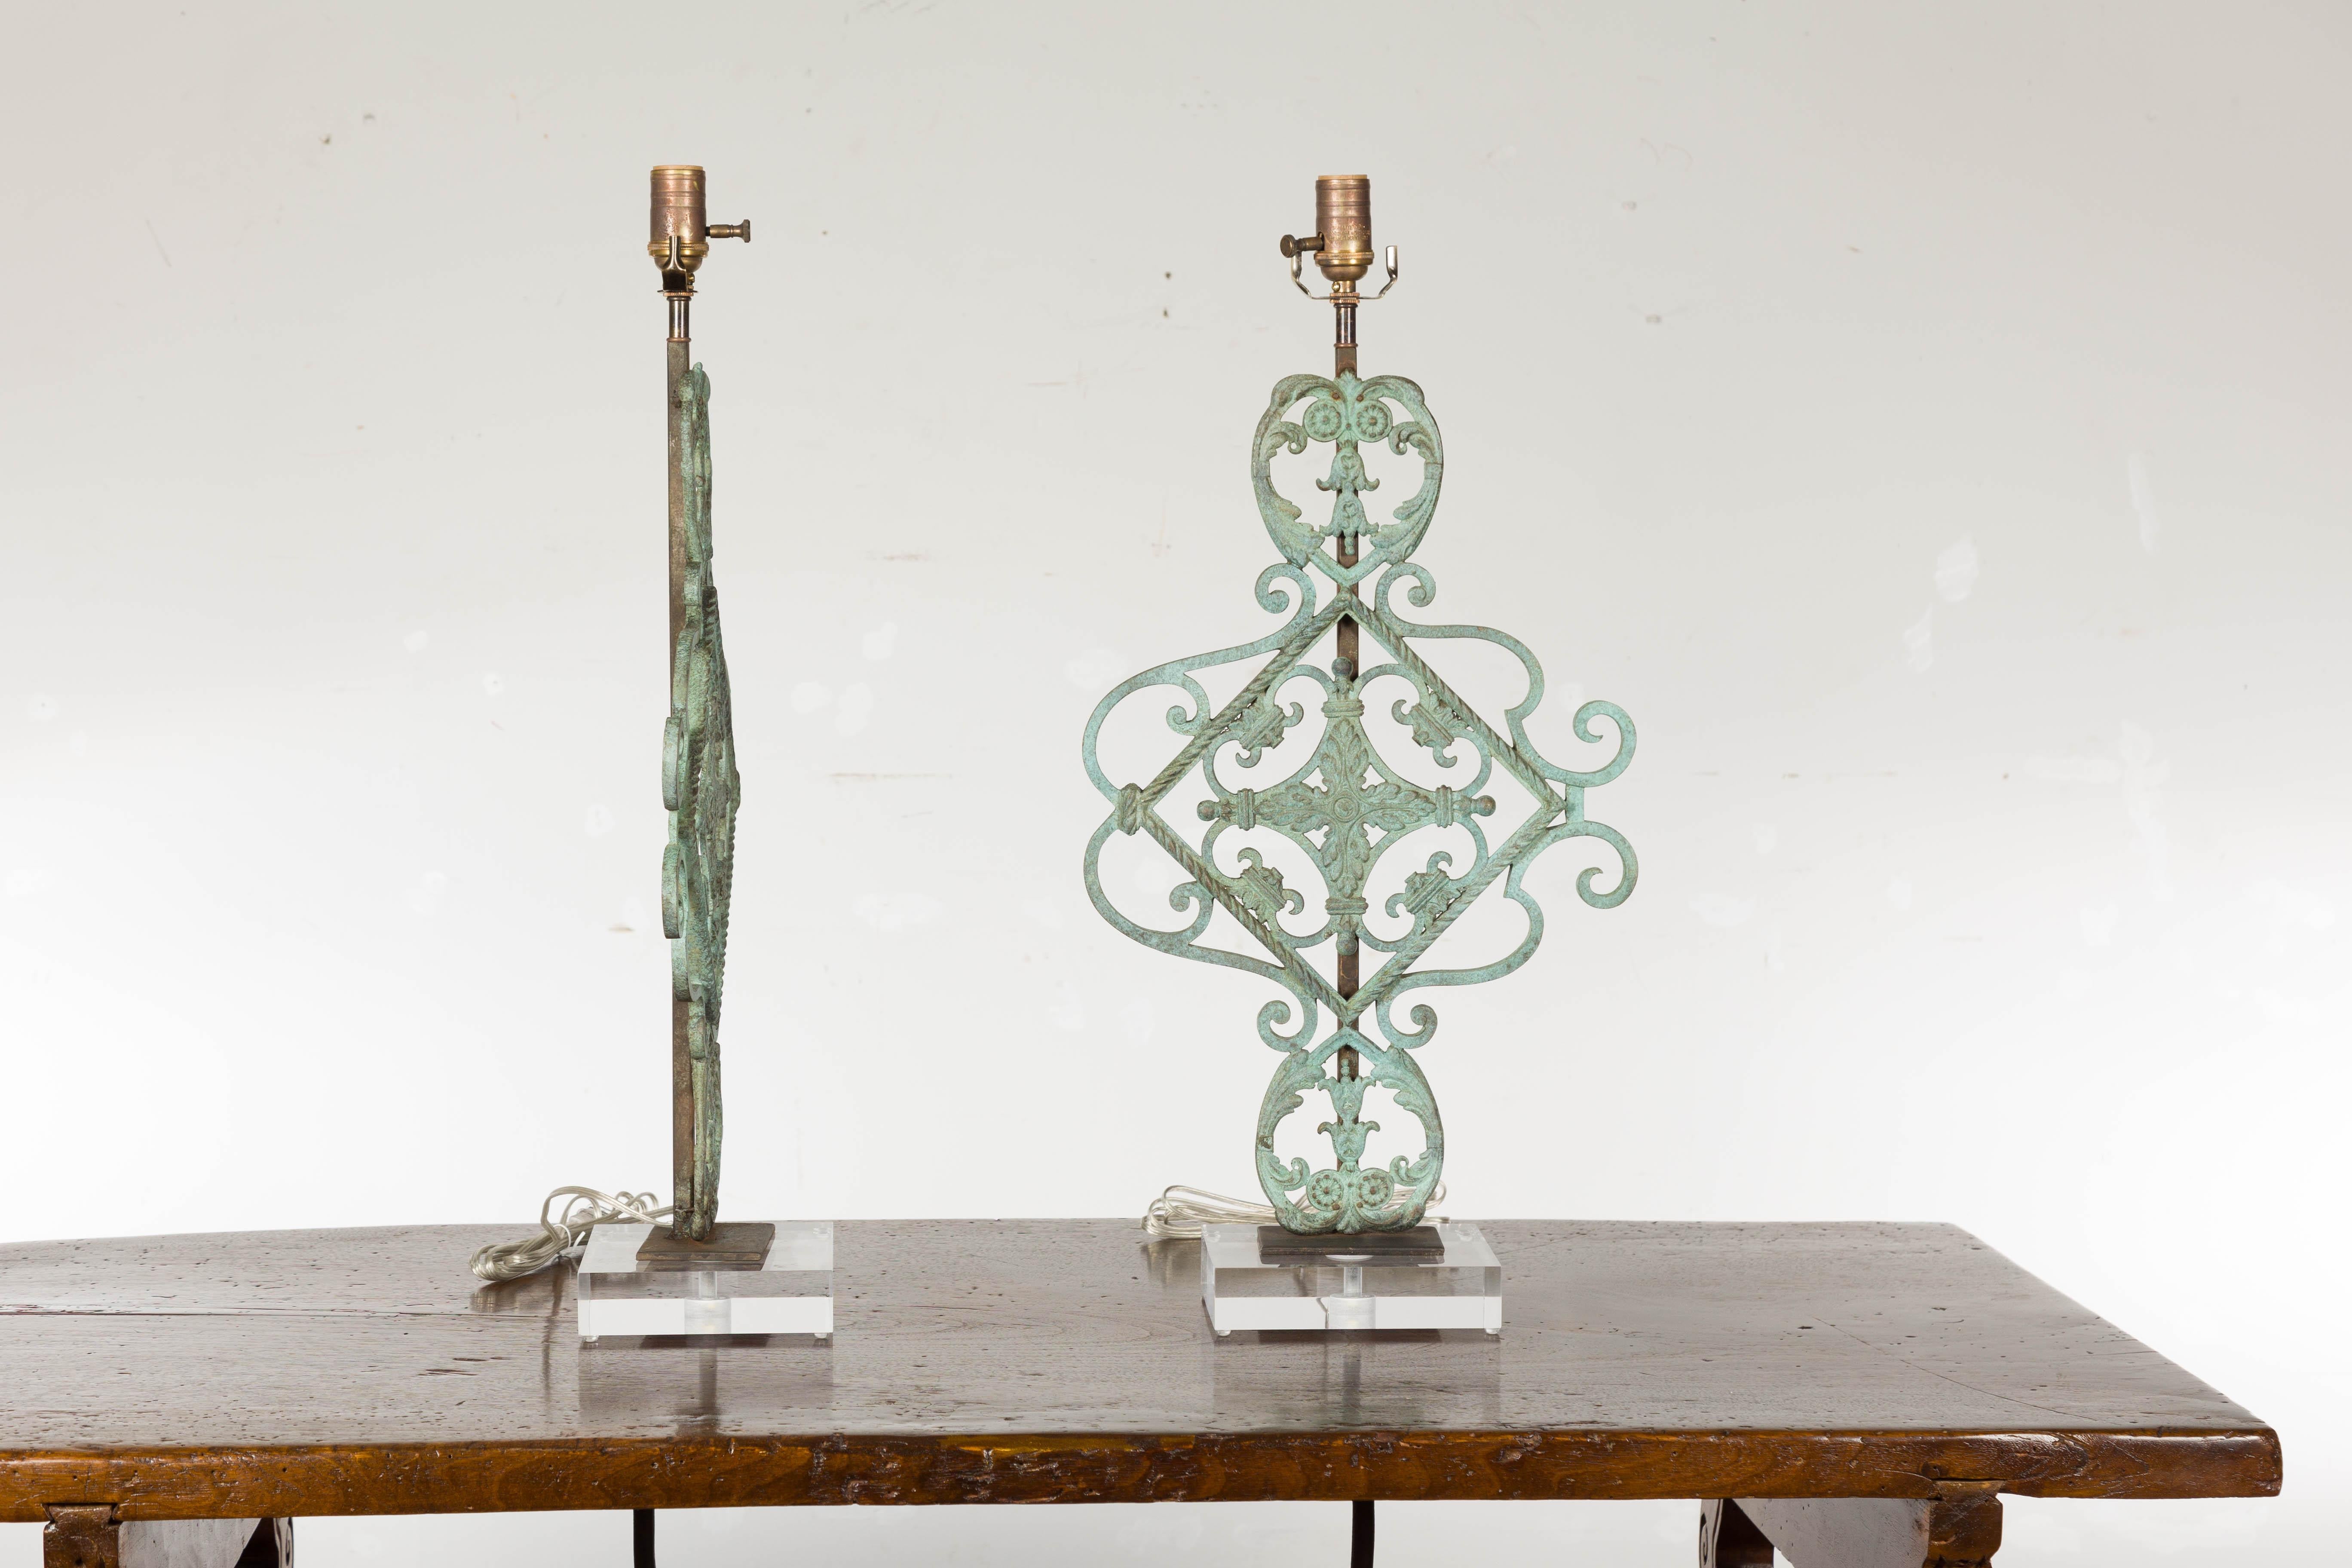 Italian Bronze Midcentury Table Lamps with Scrolling Motifs, on Lucite Bases For Sale 9